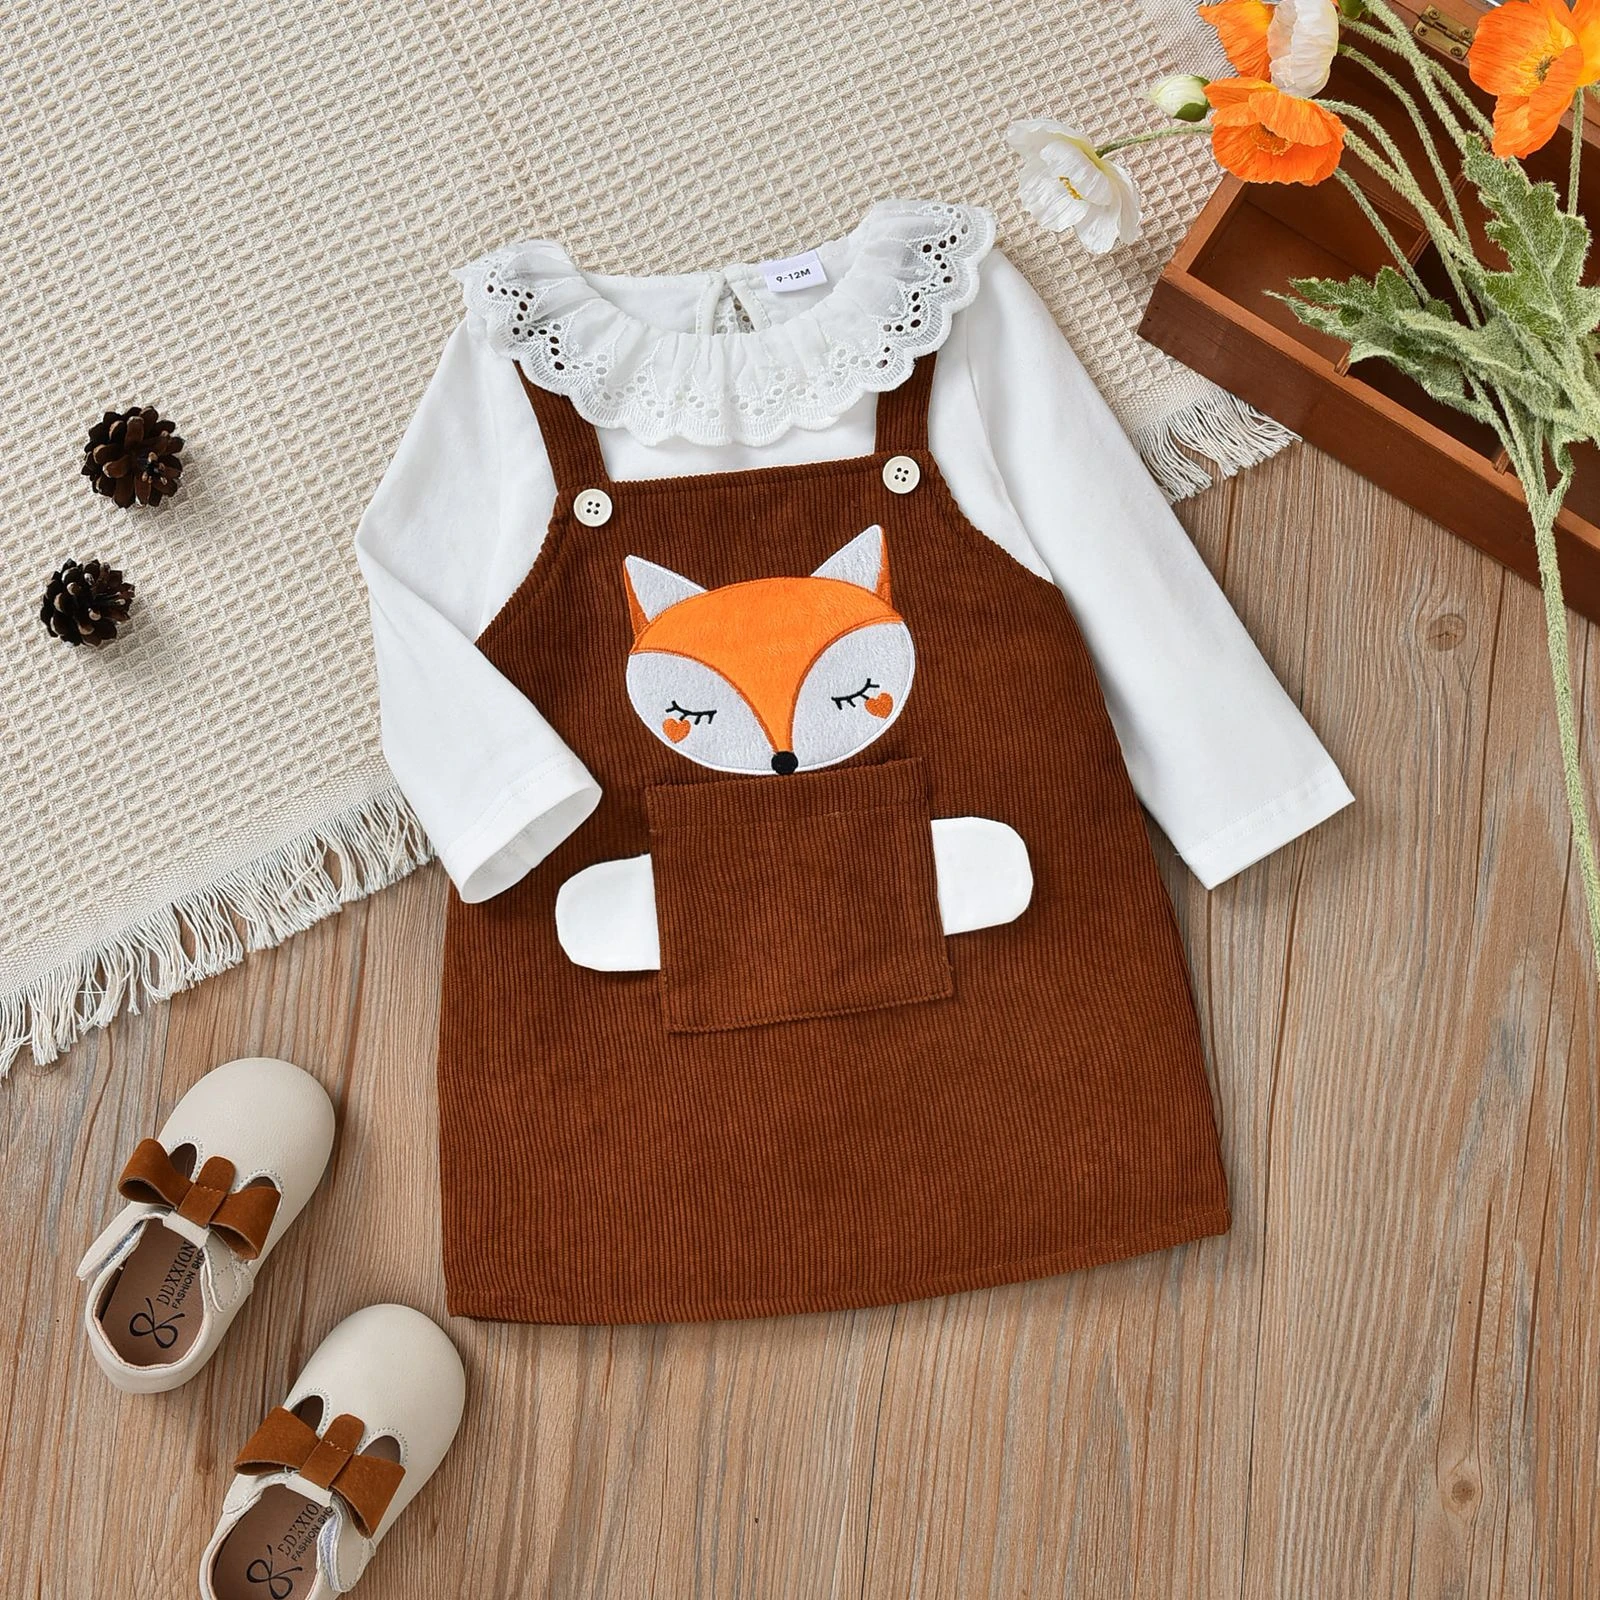 Baby Dress New Spring Autumn Toddler Long Sleeve Lace Collar Animal Print Fake Two Piece Corduroy Strap Dress Toddler Clothes newborn baby girl skirt